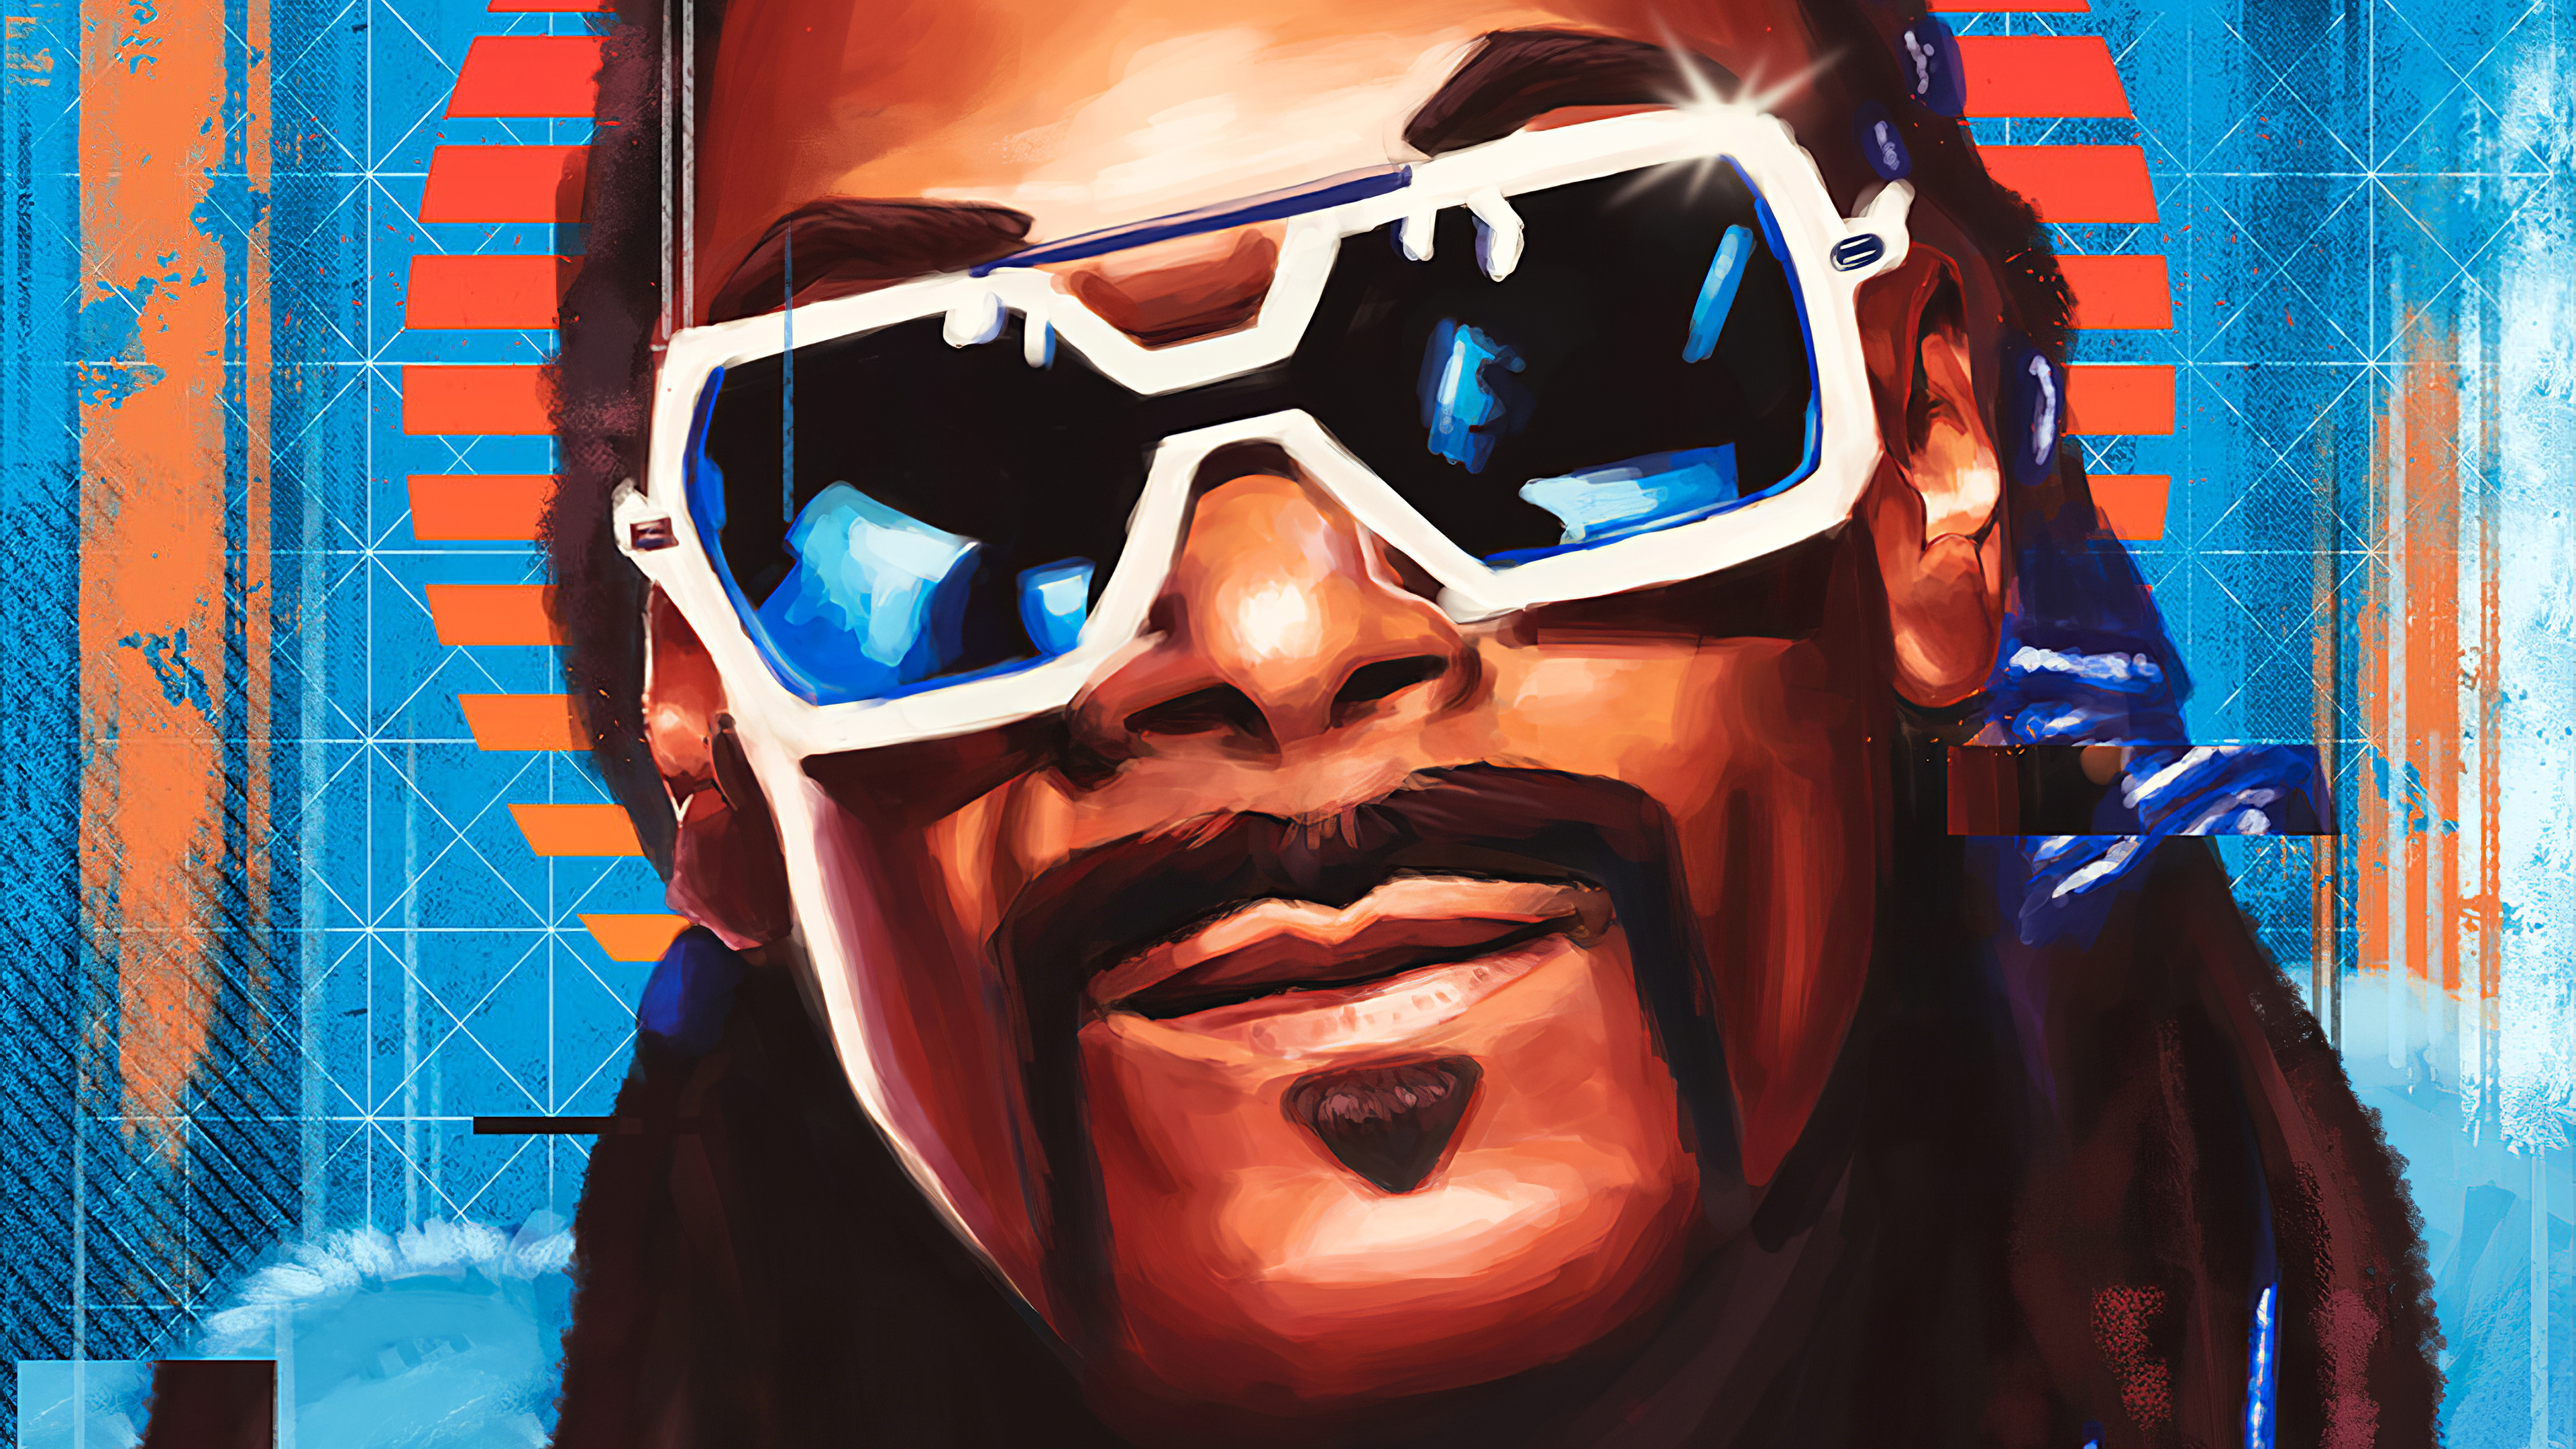 Snoop dogg digital portrait art k hd music k wallpapers images backgrounds photos and pictures